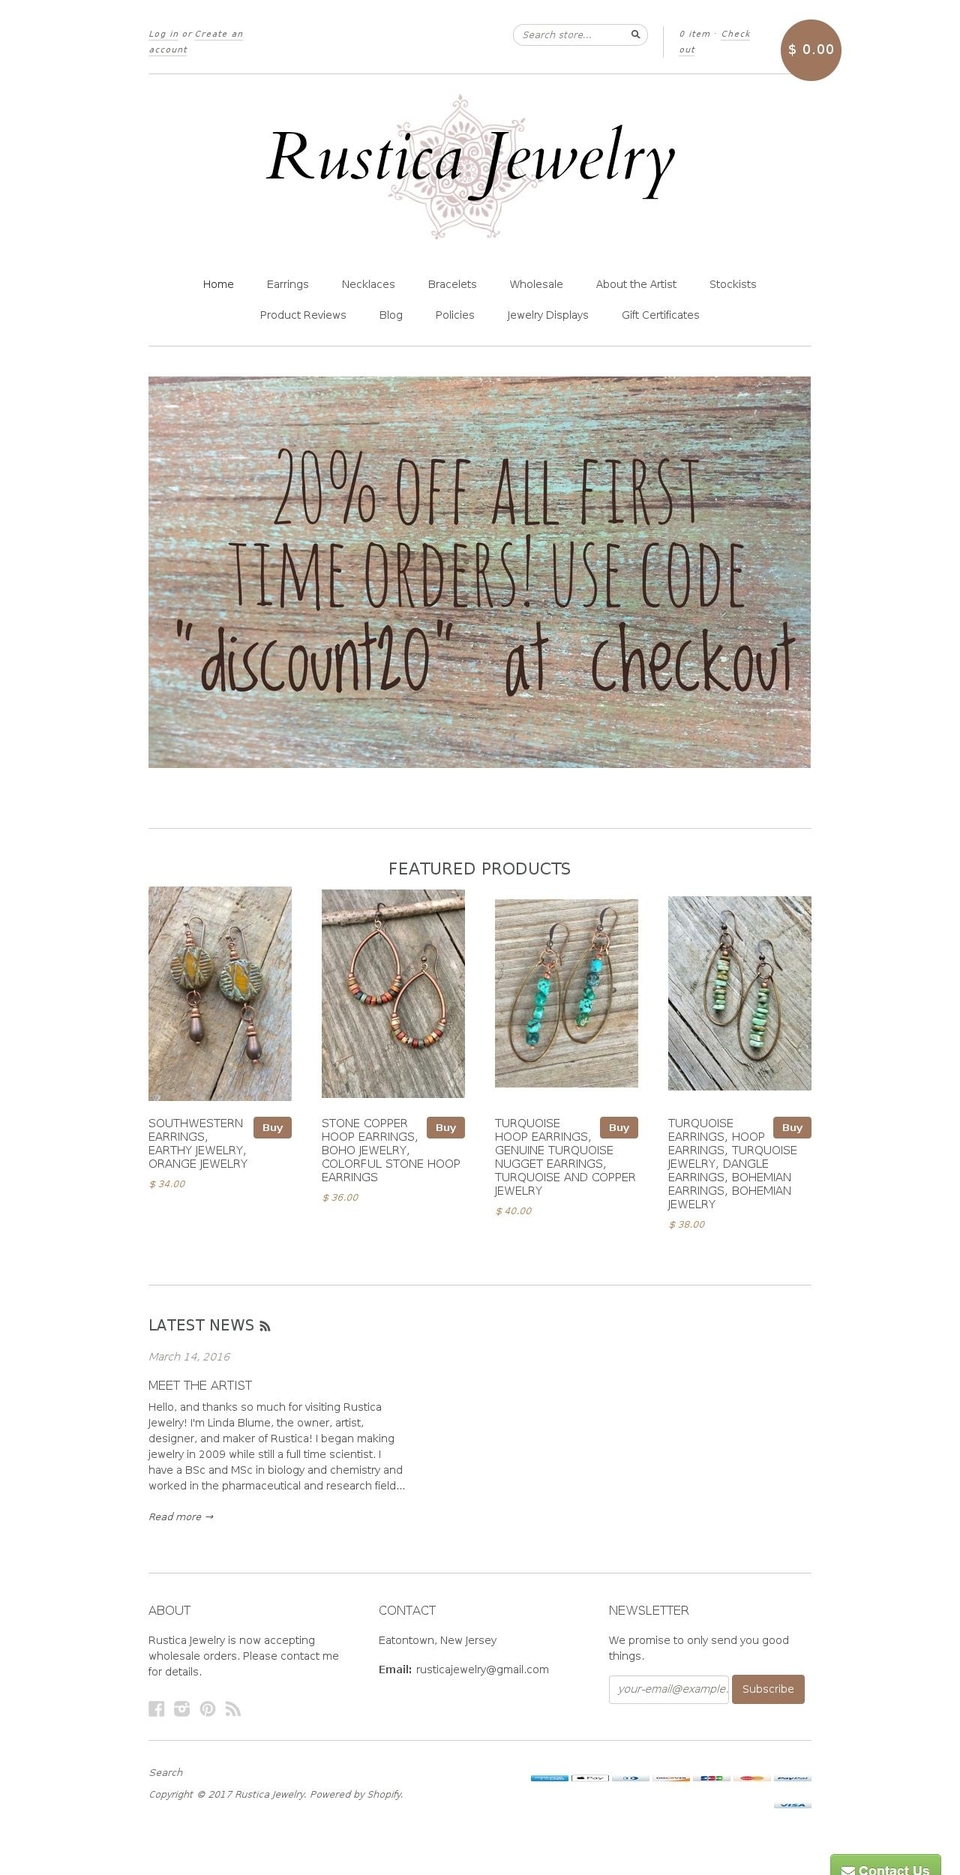 new standard Shopify theme site example rusticajewelry.com